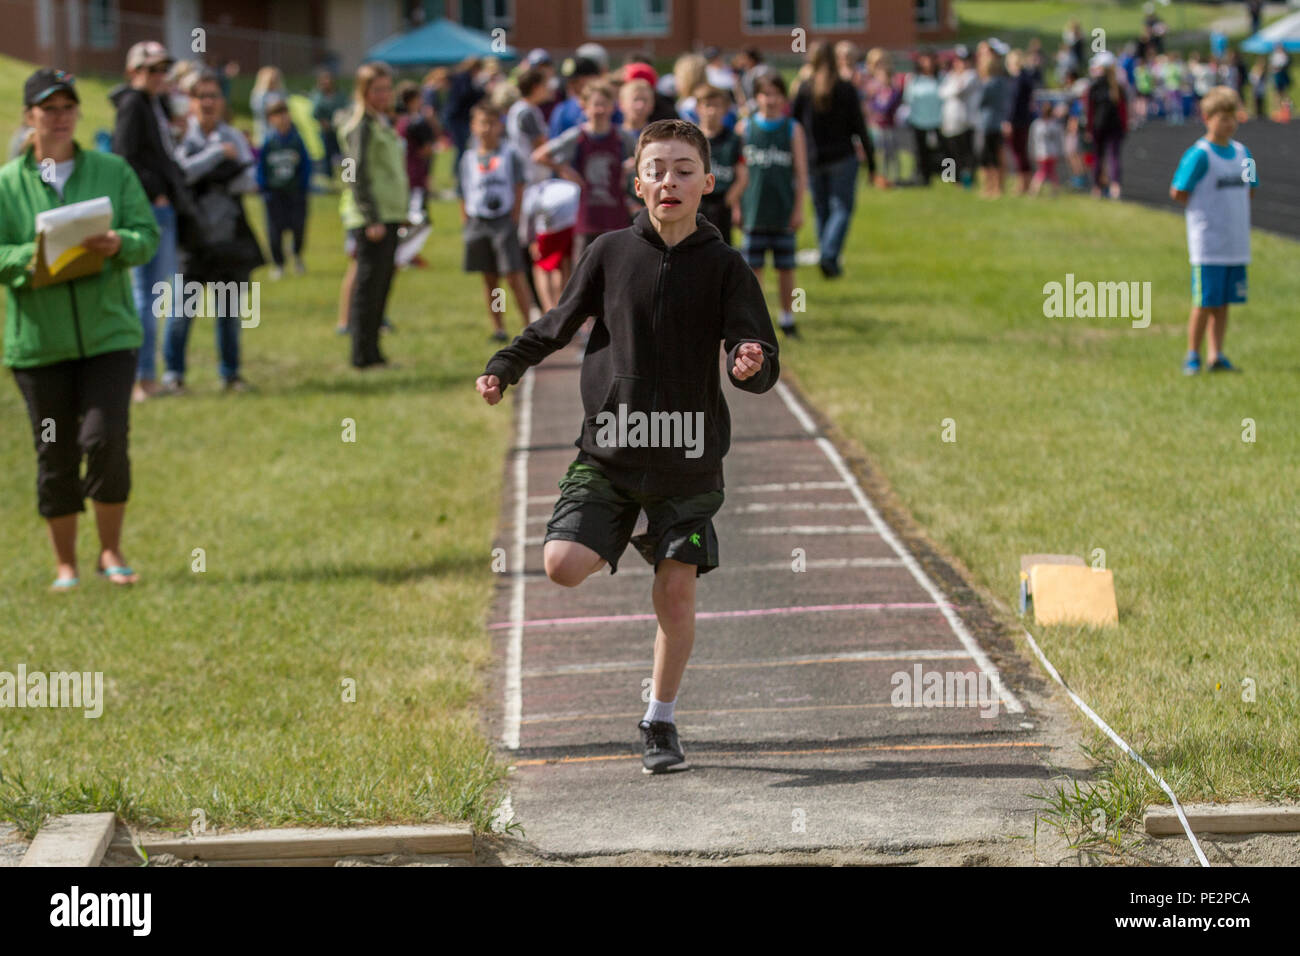 Young boy competing in track & field's  trple jump, wearing hoodie and shorts. Determinded look as he prpares to take jump. Model released Stock Photo